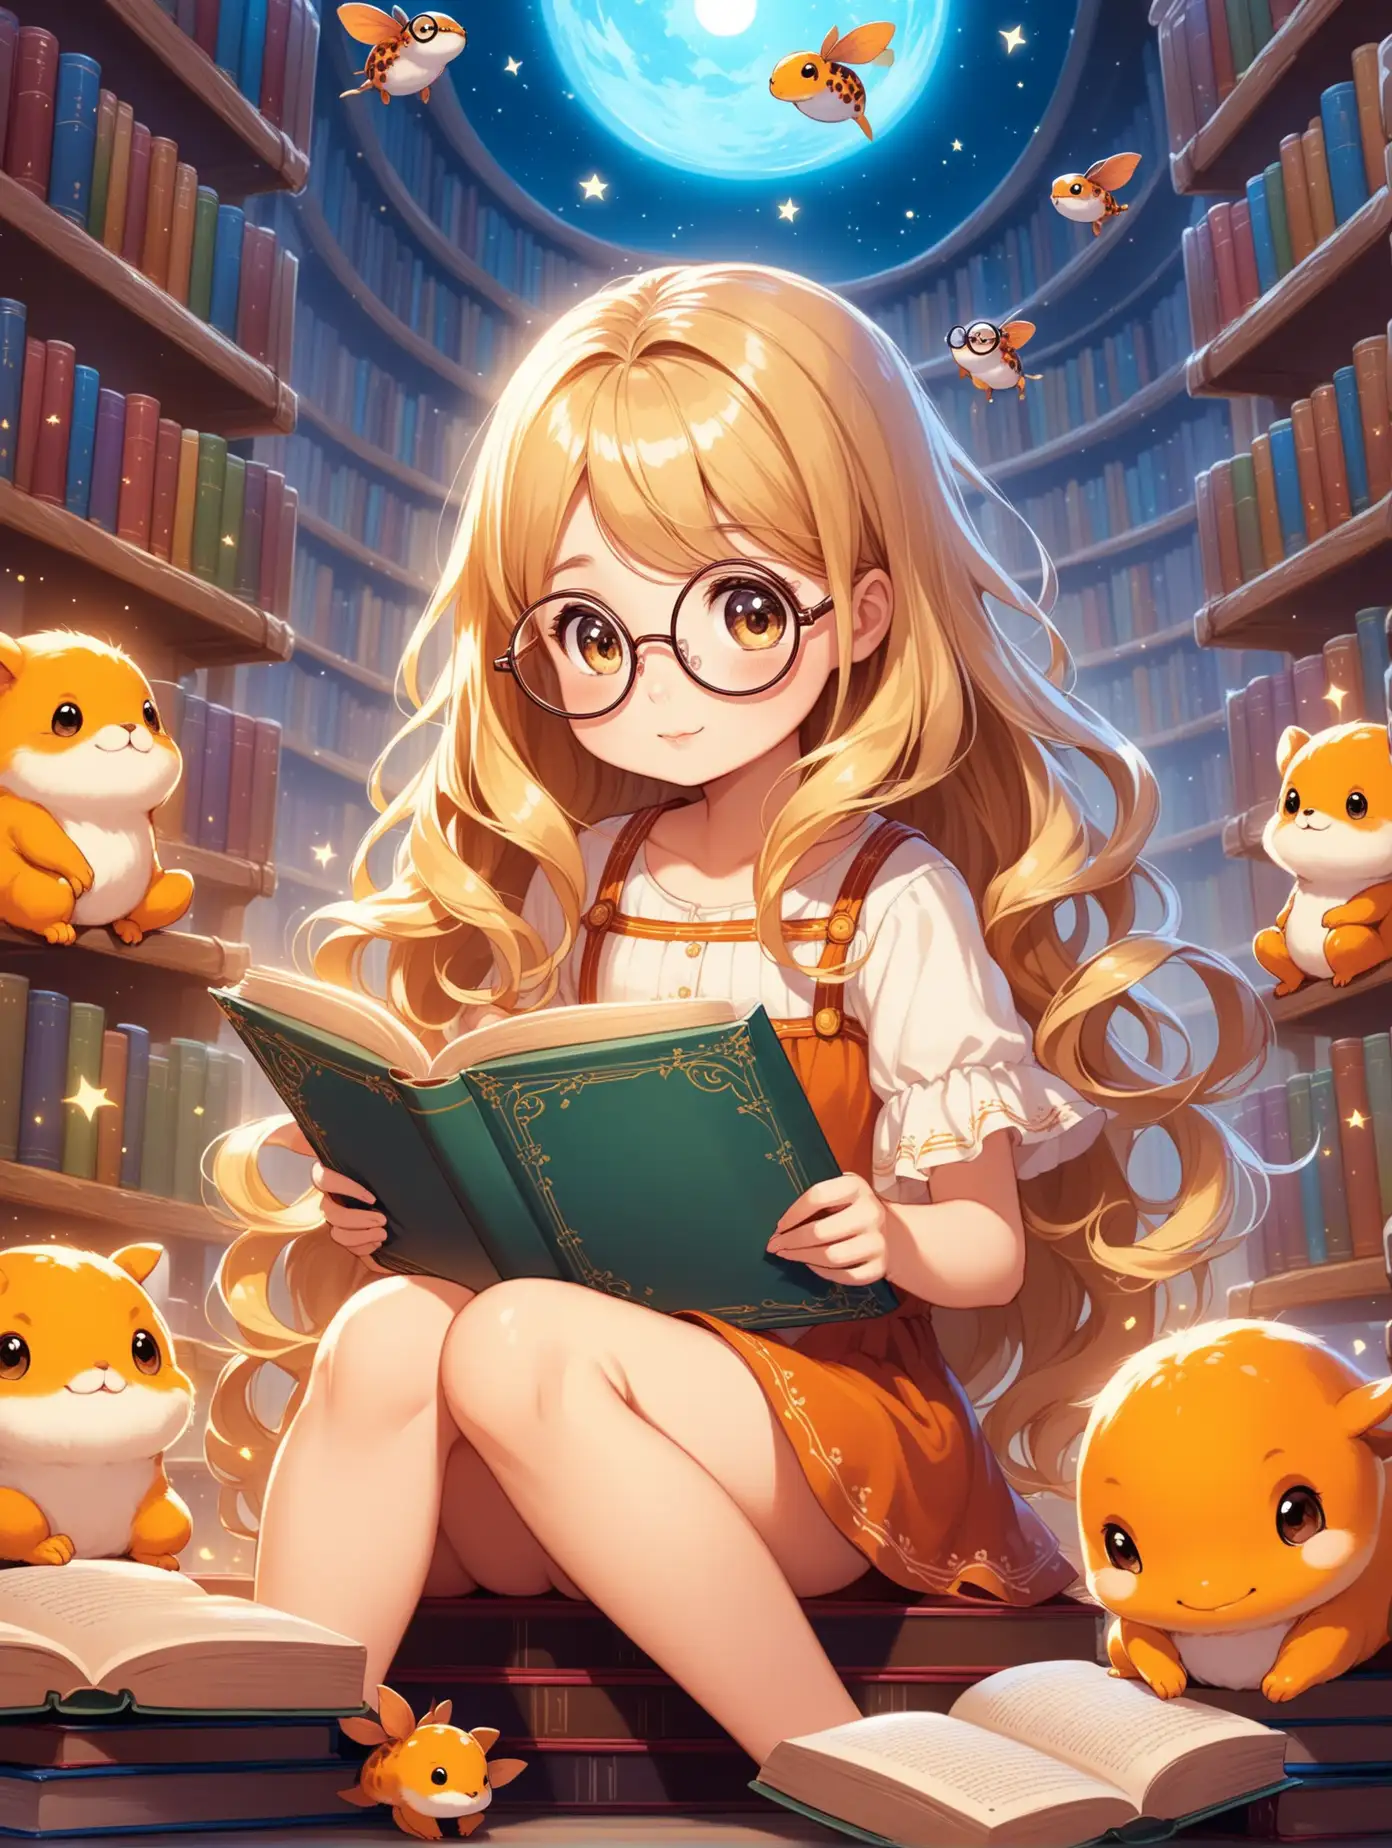 Adorable Cartoon Girl with Curled Blonde Hair Reading Surrounded by Fantasy Creatures in Library Wonderland